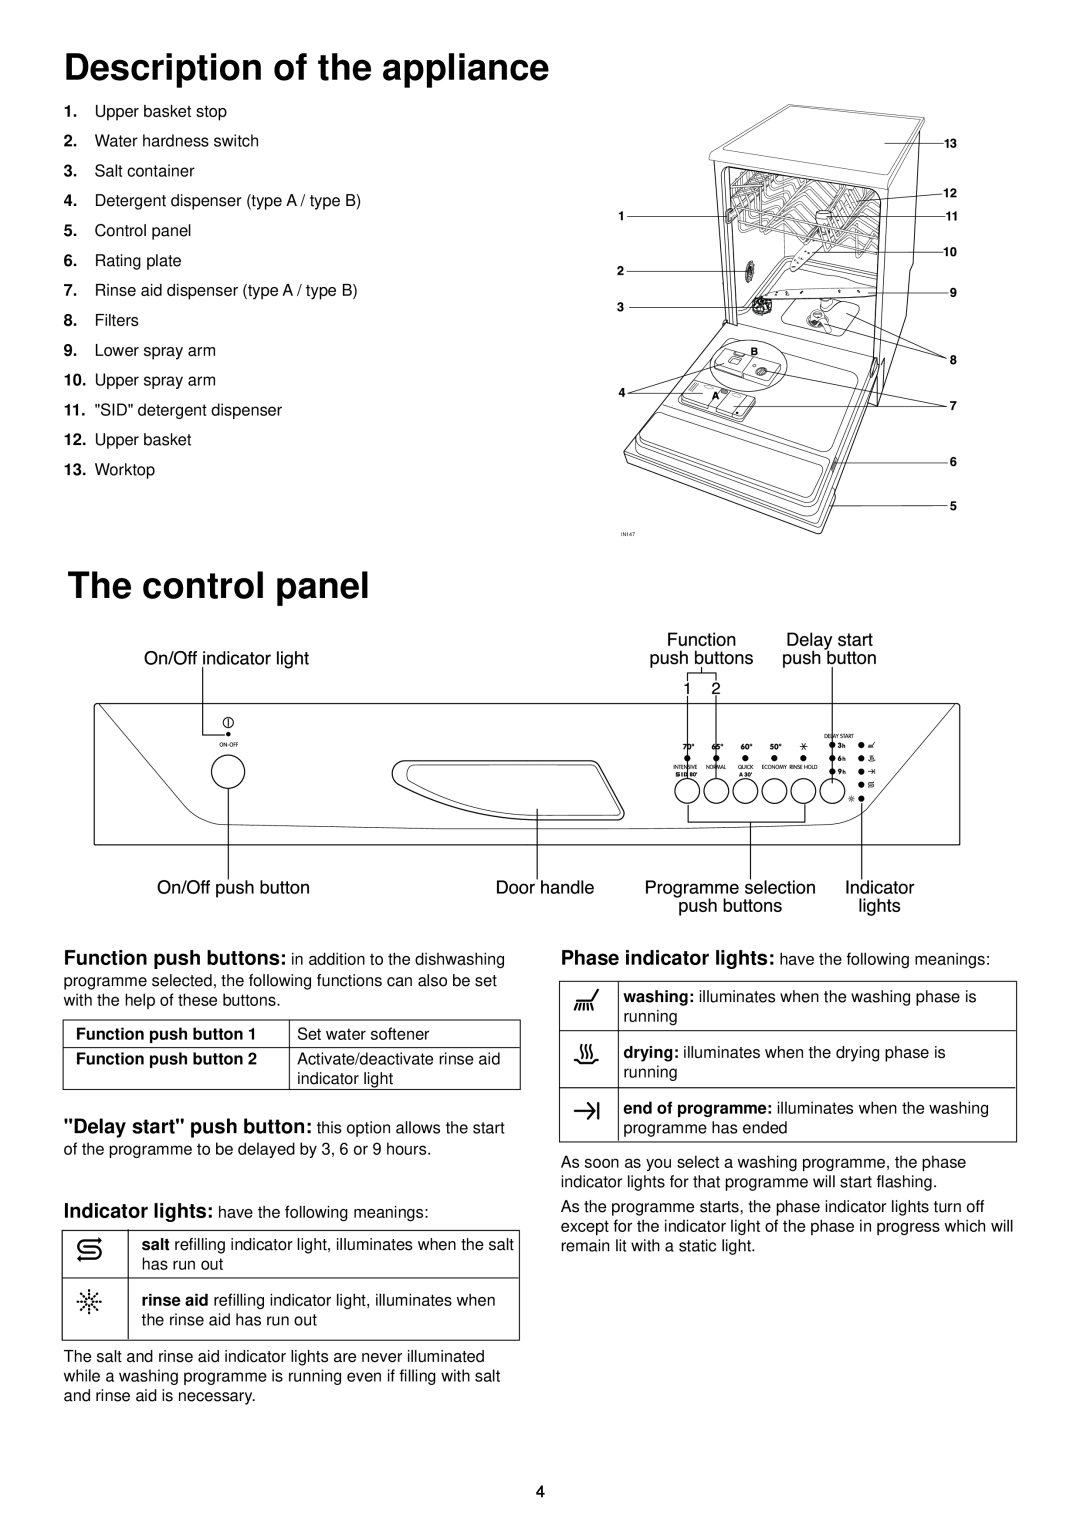 Zanussi DE 6854 manual Description of the appliance, The control panel, Function push buttons, Indicator lights 